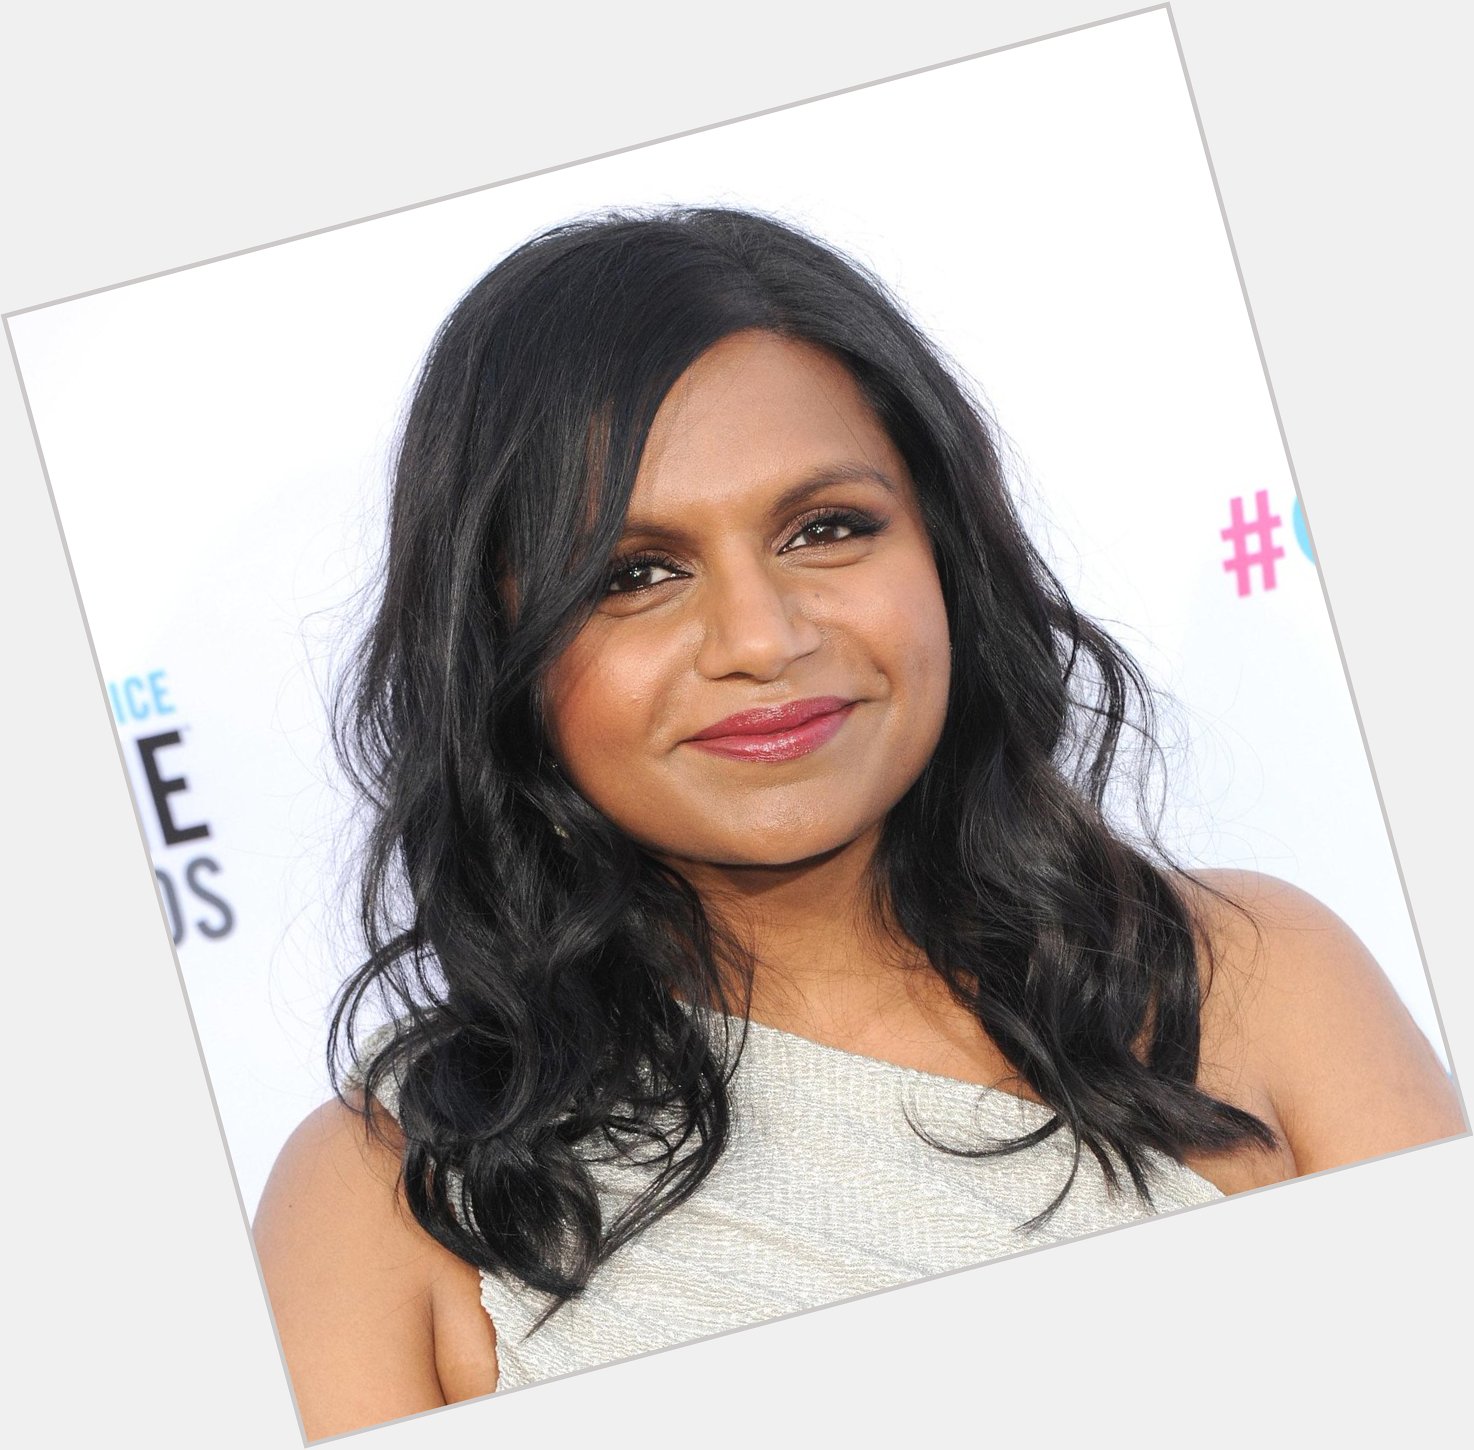 Happy 36th Birthday, Mindy Kaling! She is famous in The Mindy Project and was Disgust in the Pixar film, Inside Out. 